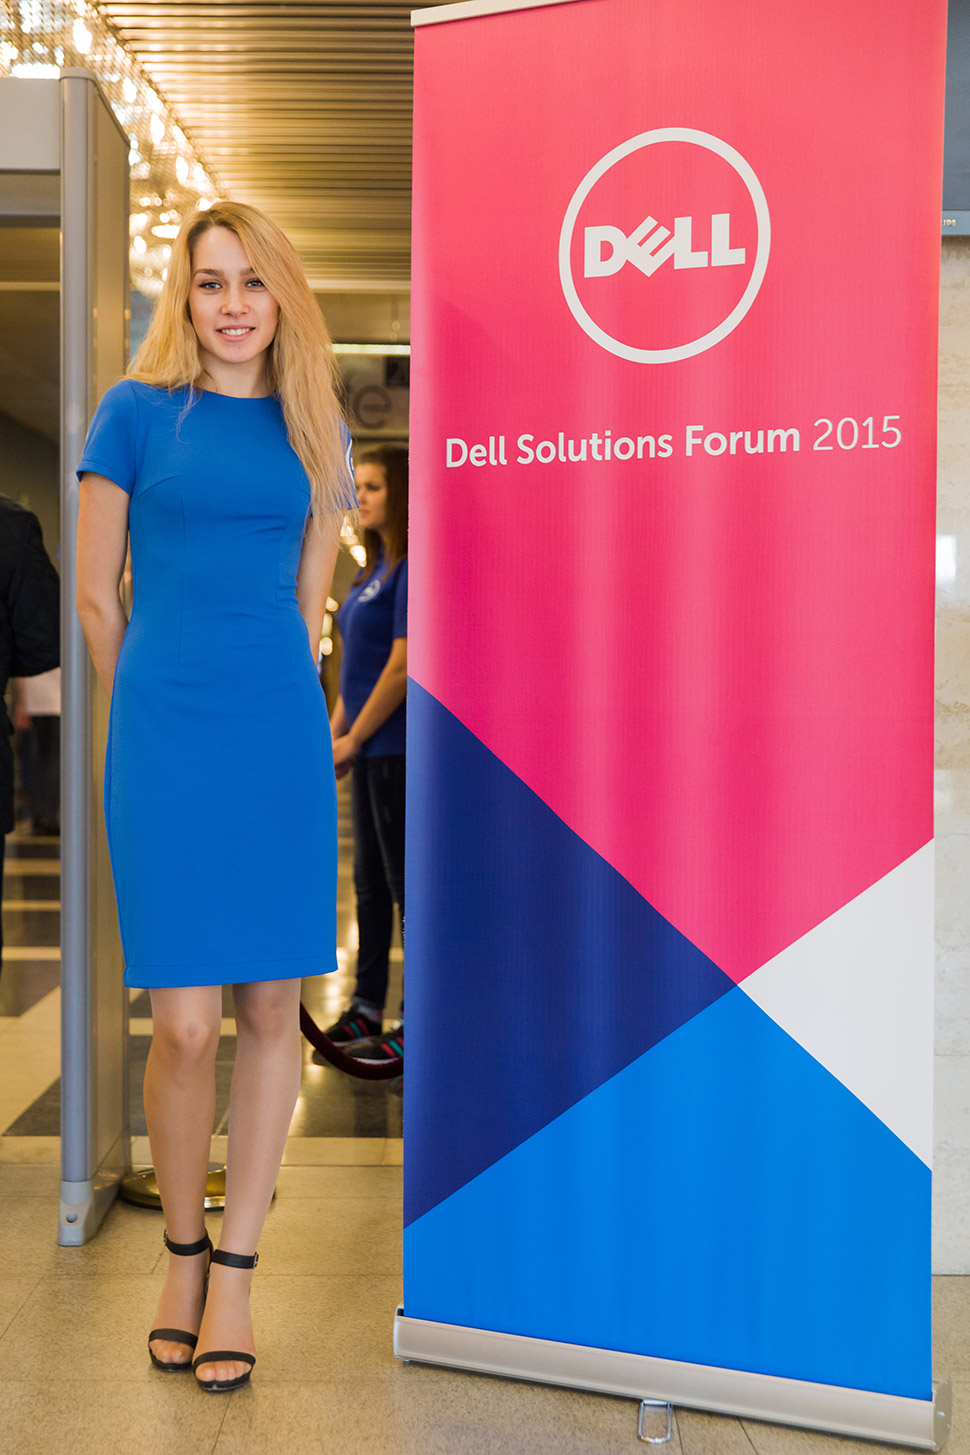 Dell Solutions Forum 2015